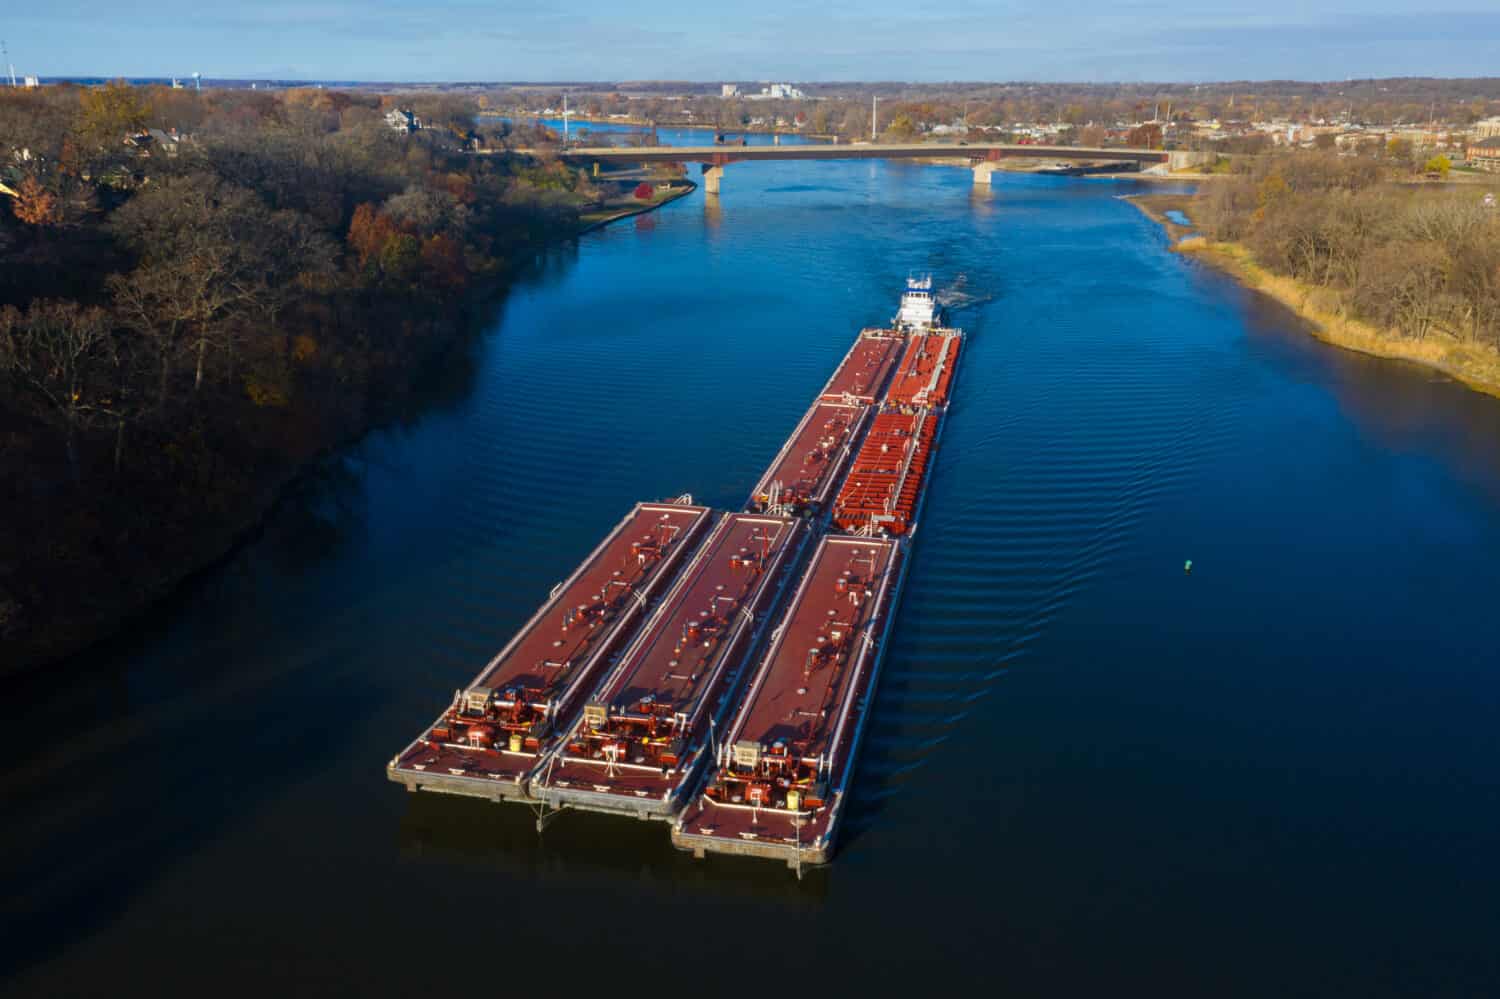 A red barge ships cargo down the Illinois River near Ottawa, Illinois. Aerial photograph via drone.